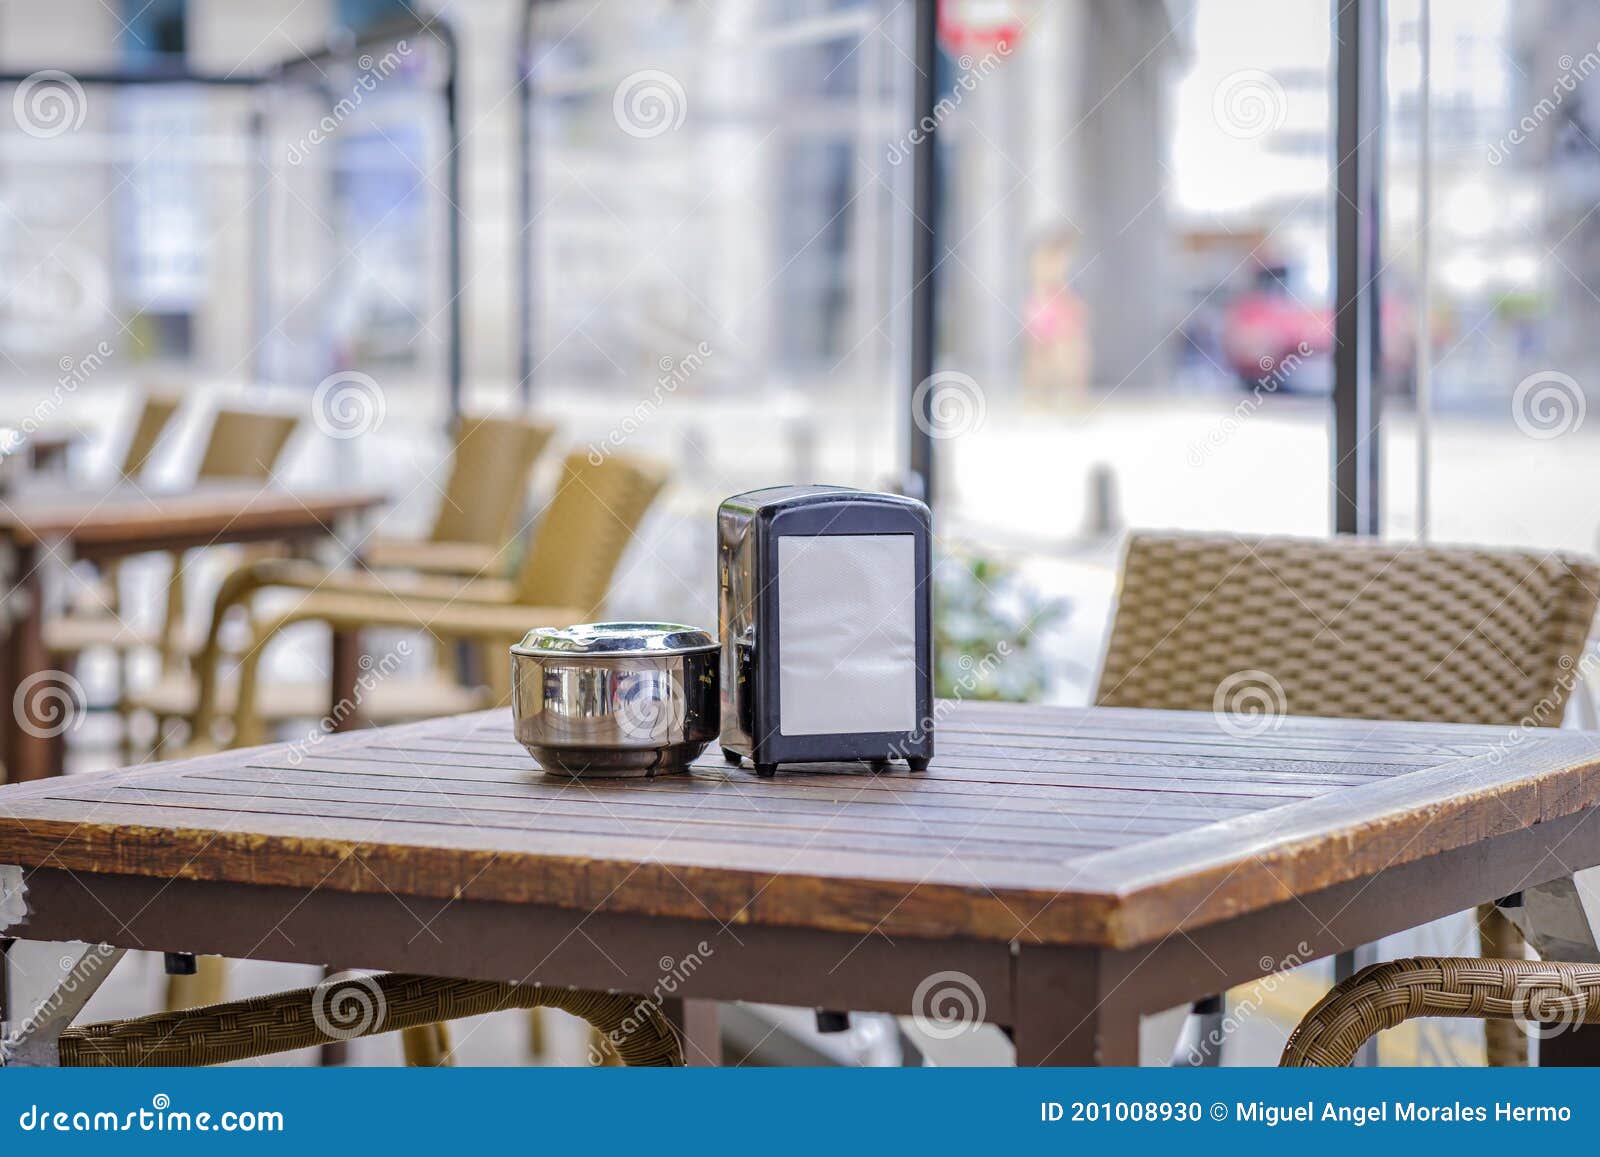 ashtray and napkin on a terrace of a cafeteria